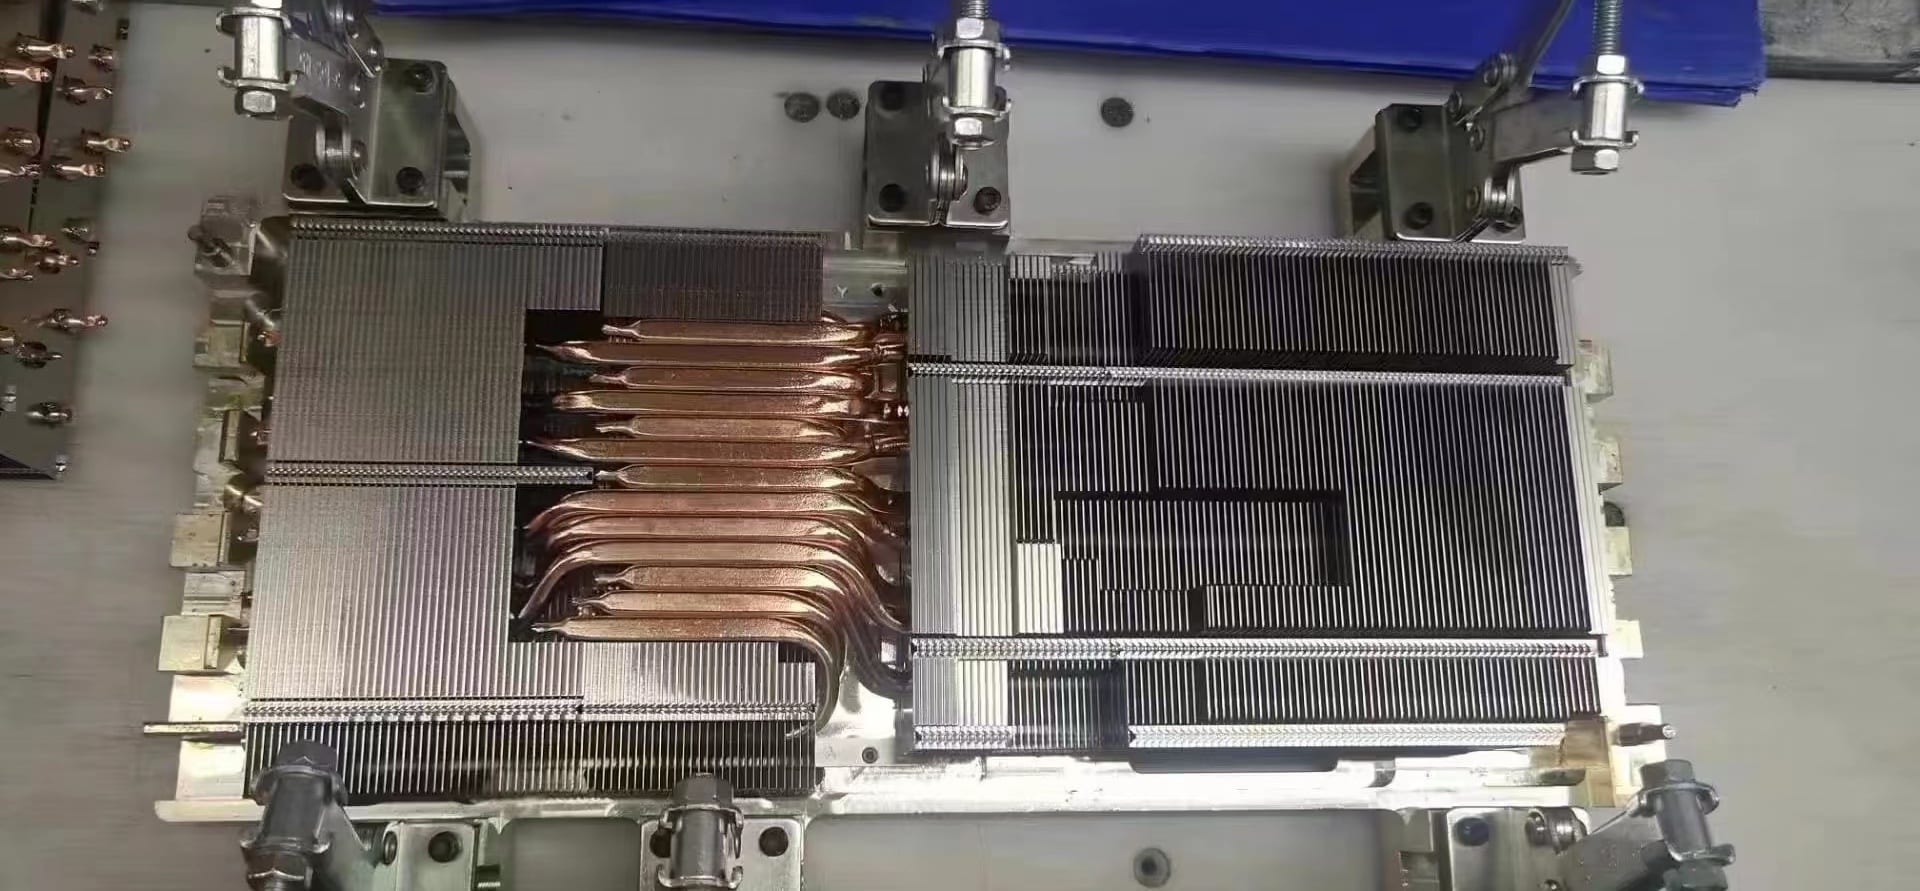 heat pipes